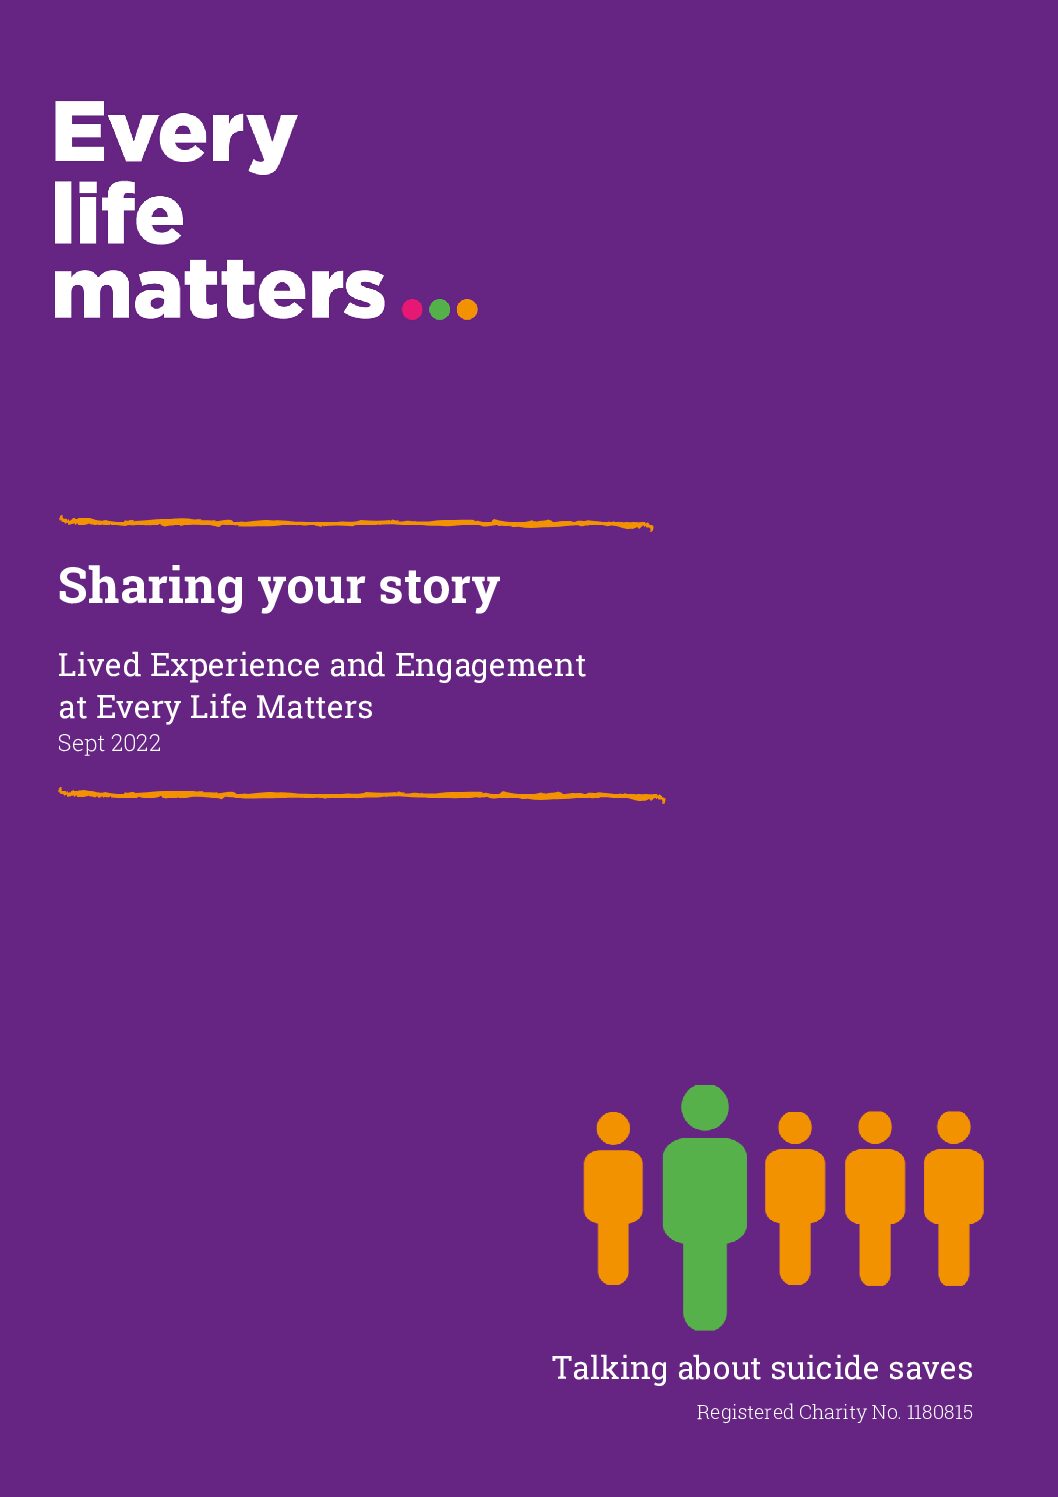 https://www.every-life-matters.org.uk/wp-content/uploads/2023/02/LE-Toolkit-v3-pdf.jpg